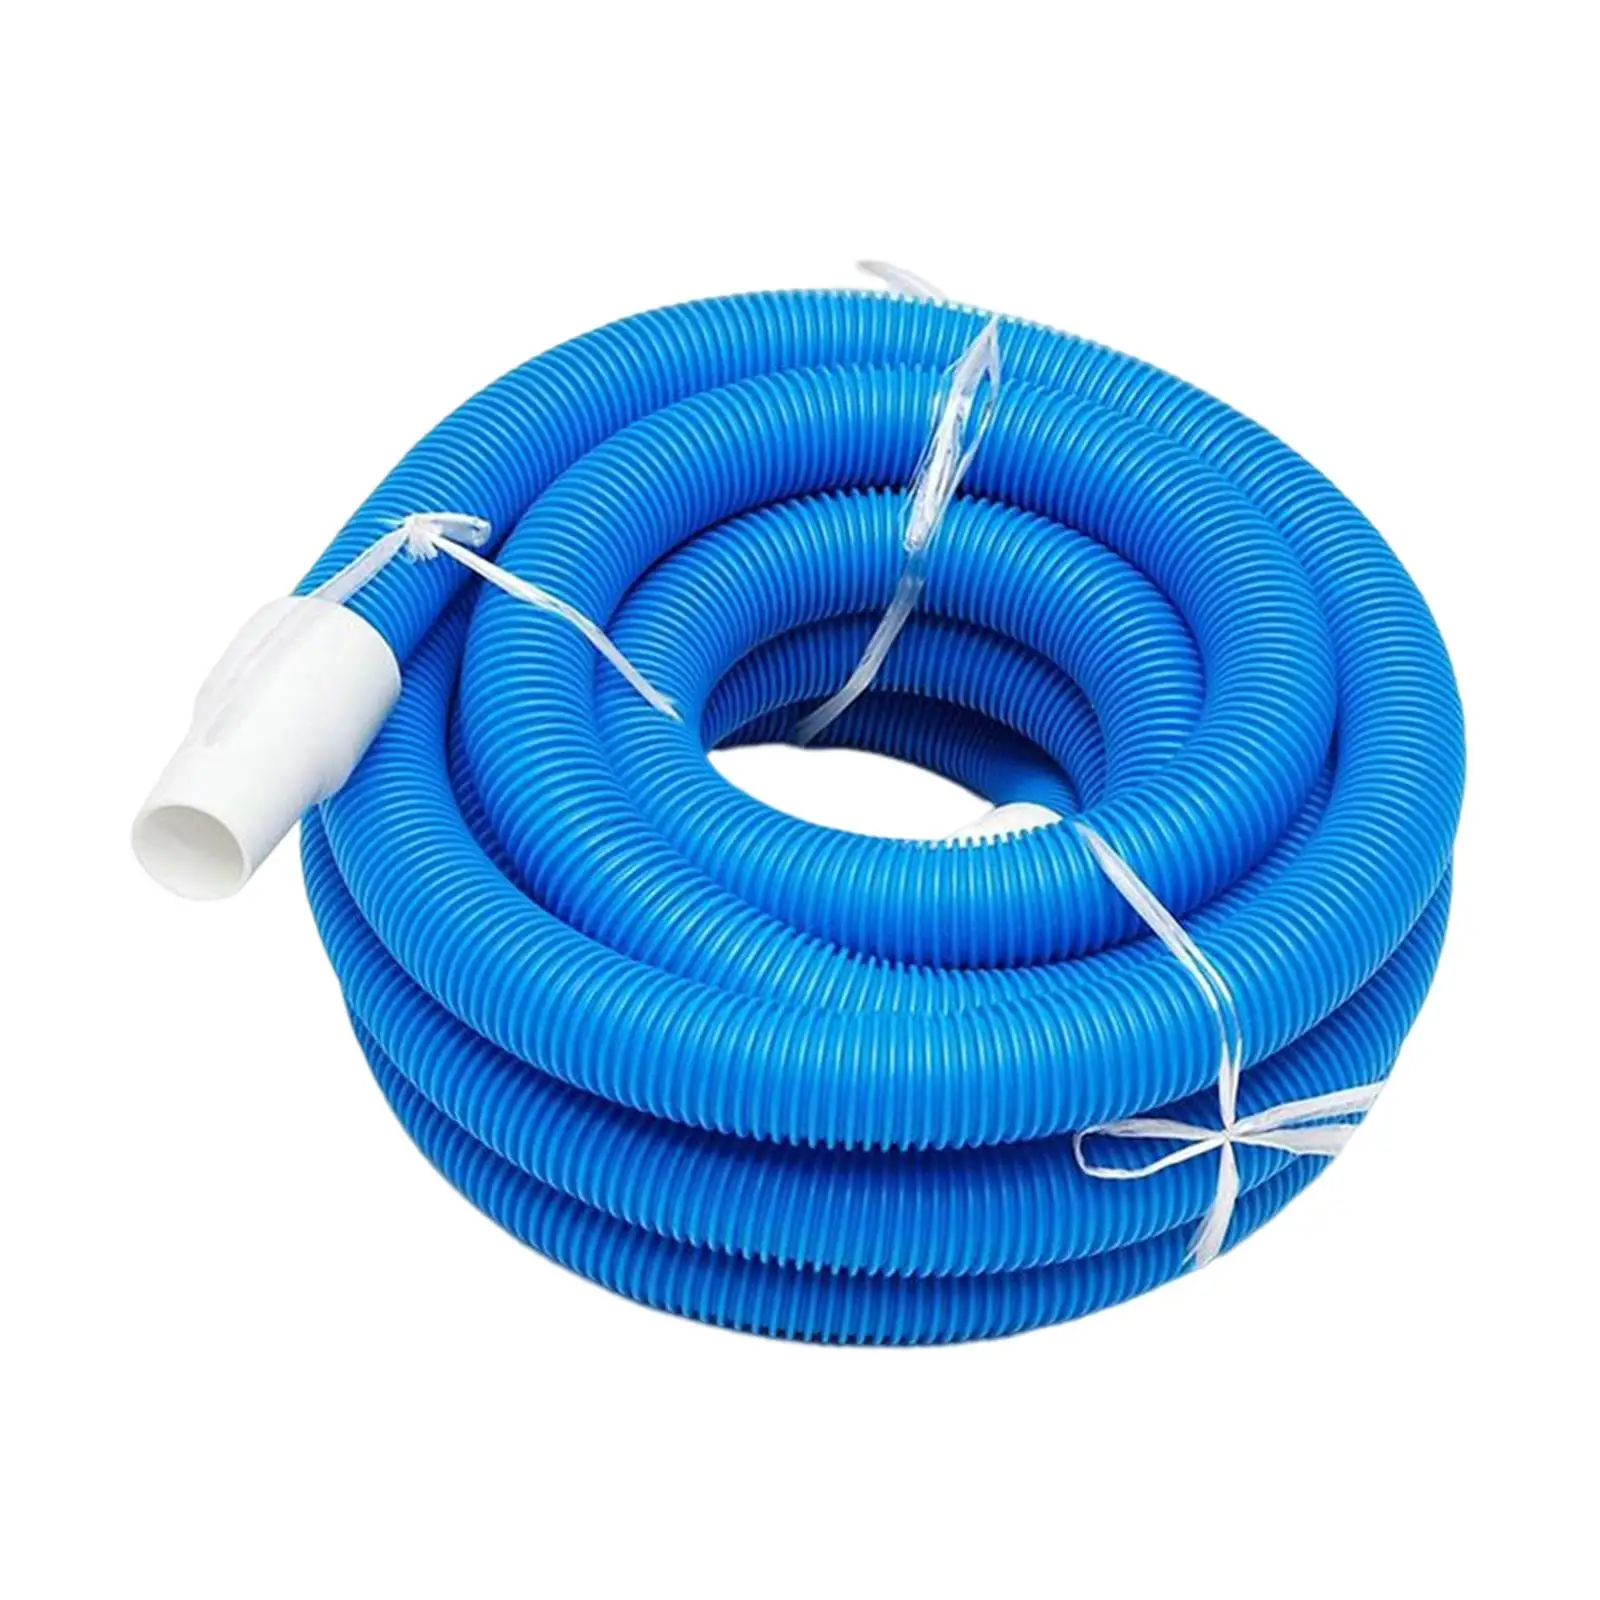 Ground Pool Vacuum Hose Replacement Swimming Pool Hose for in Ground Pool 29.52ft Swimming Pools Cleaning Pipe Replacement Hose